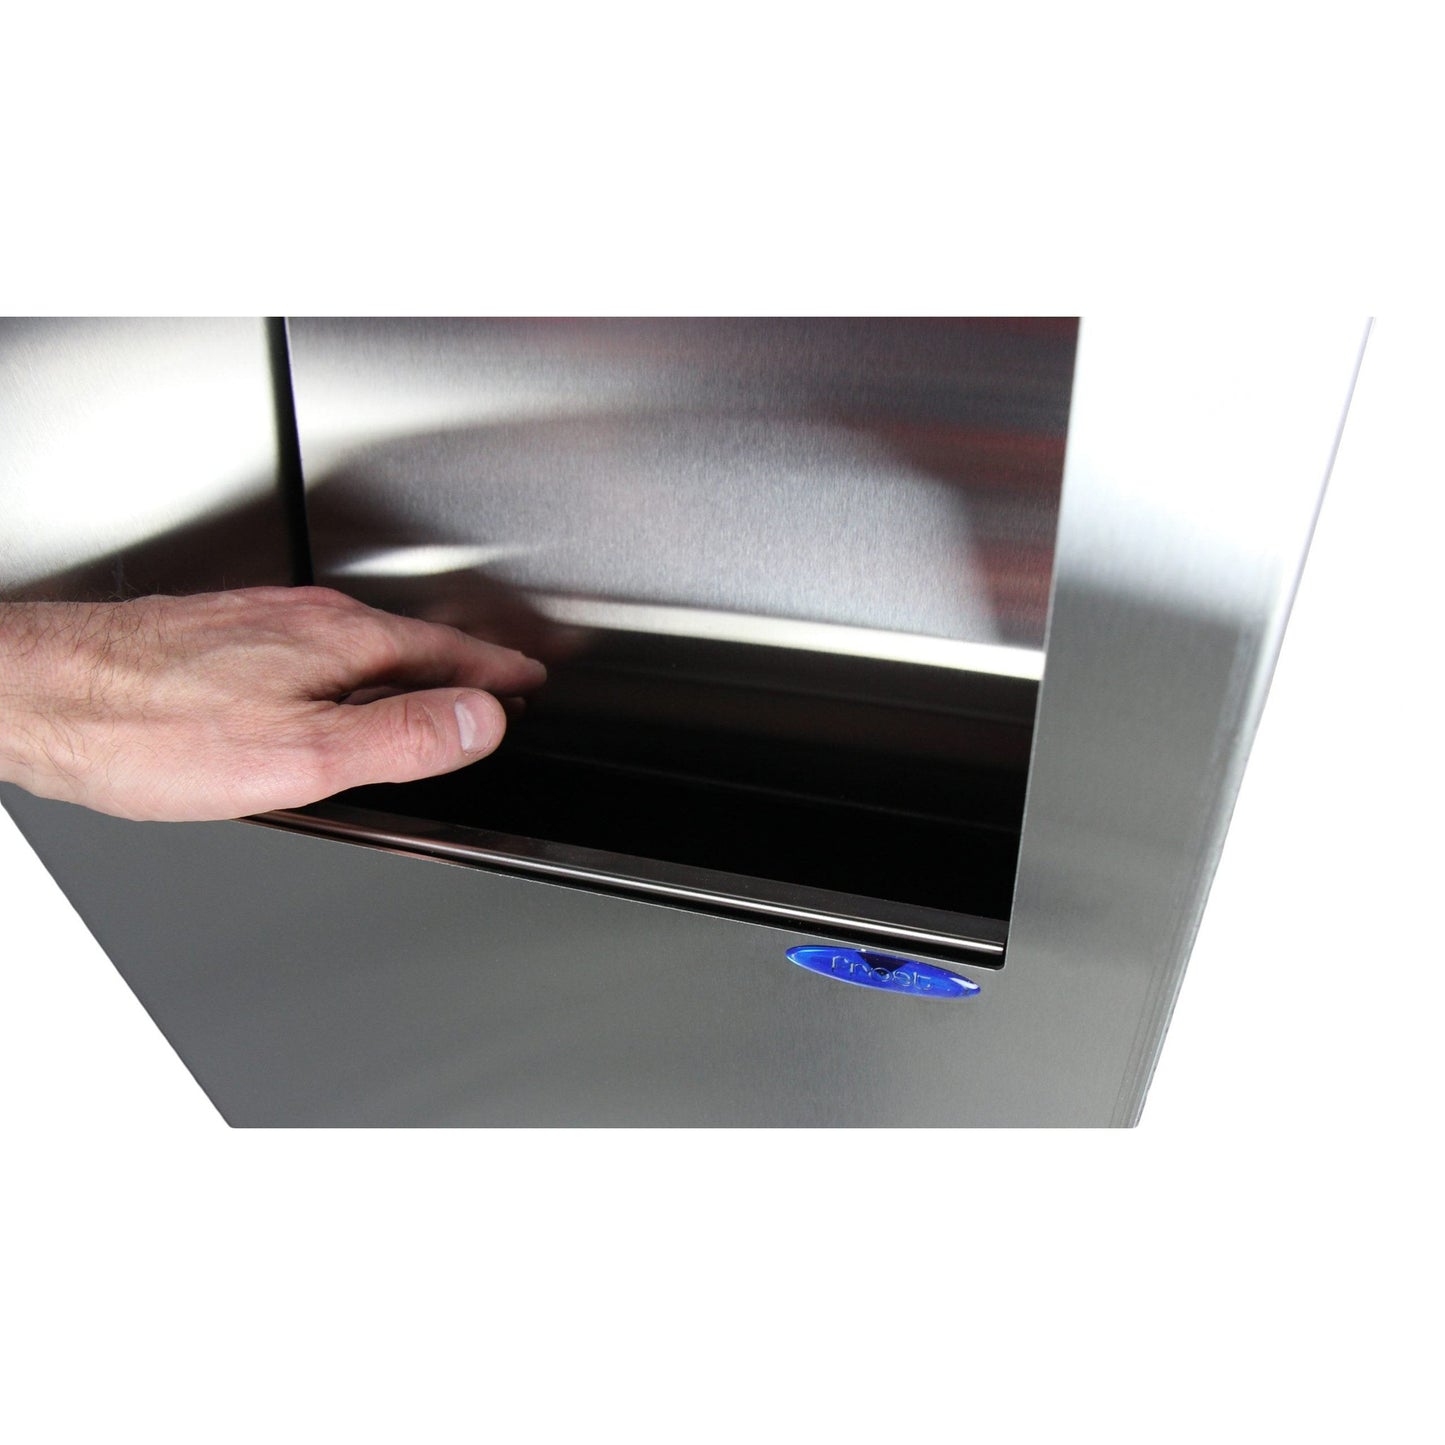 Frost 400-50A Recessed Control Roll Stainless Steel Paper Dispenser and Disposal